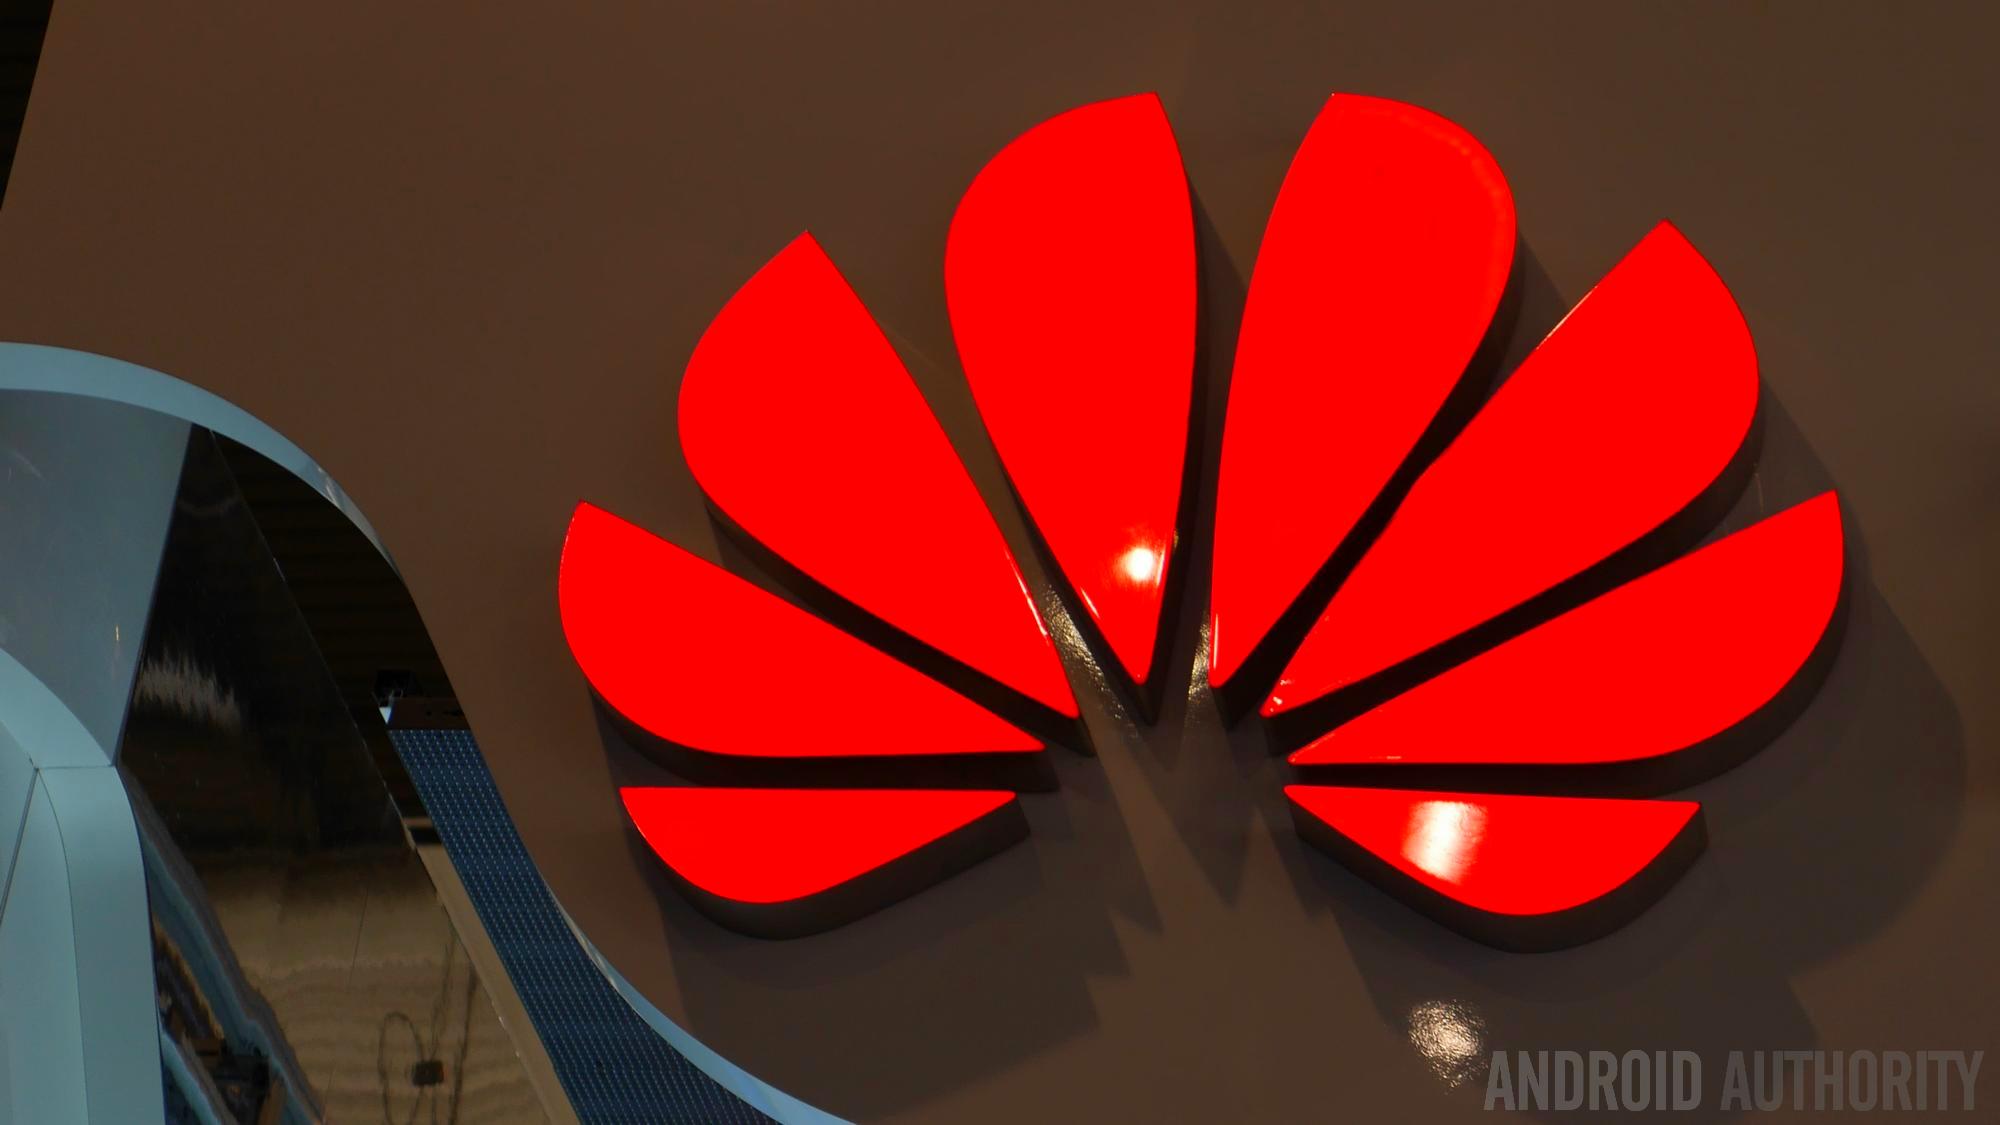 The Huawei Logo from a trade event.